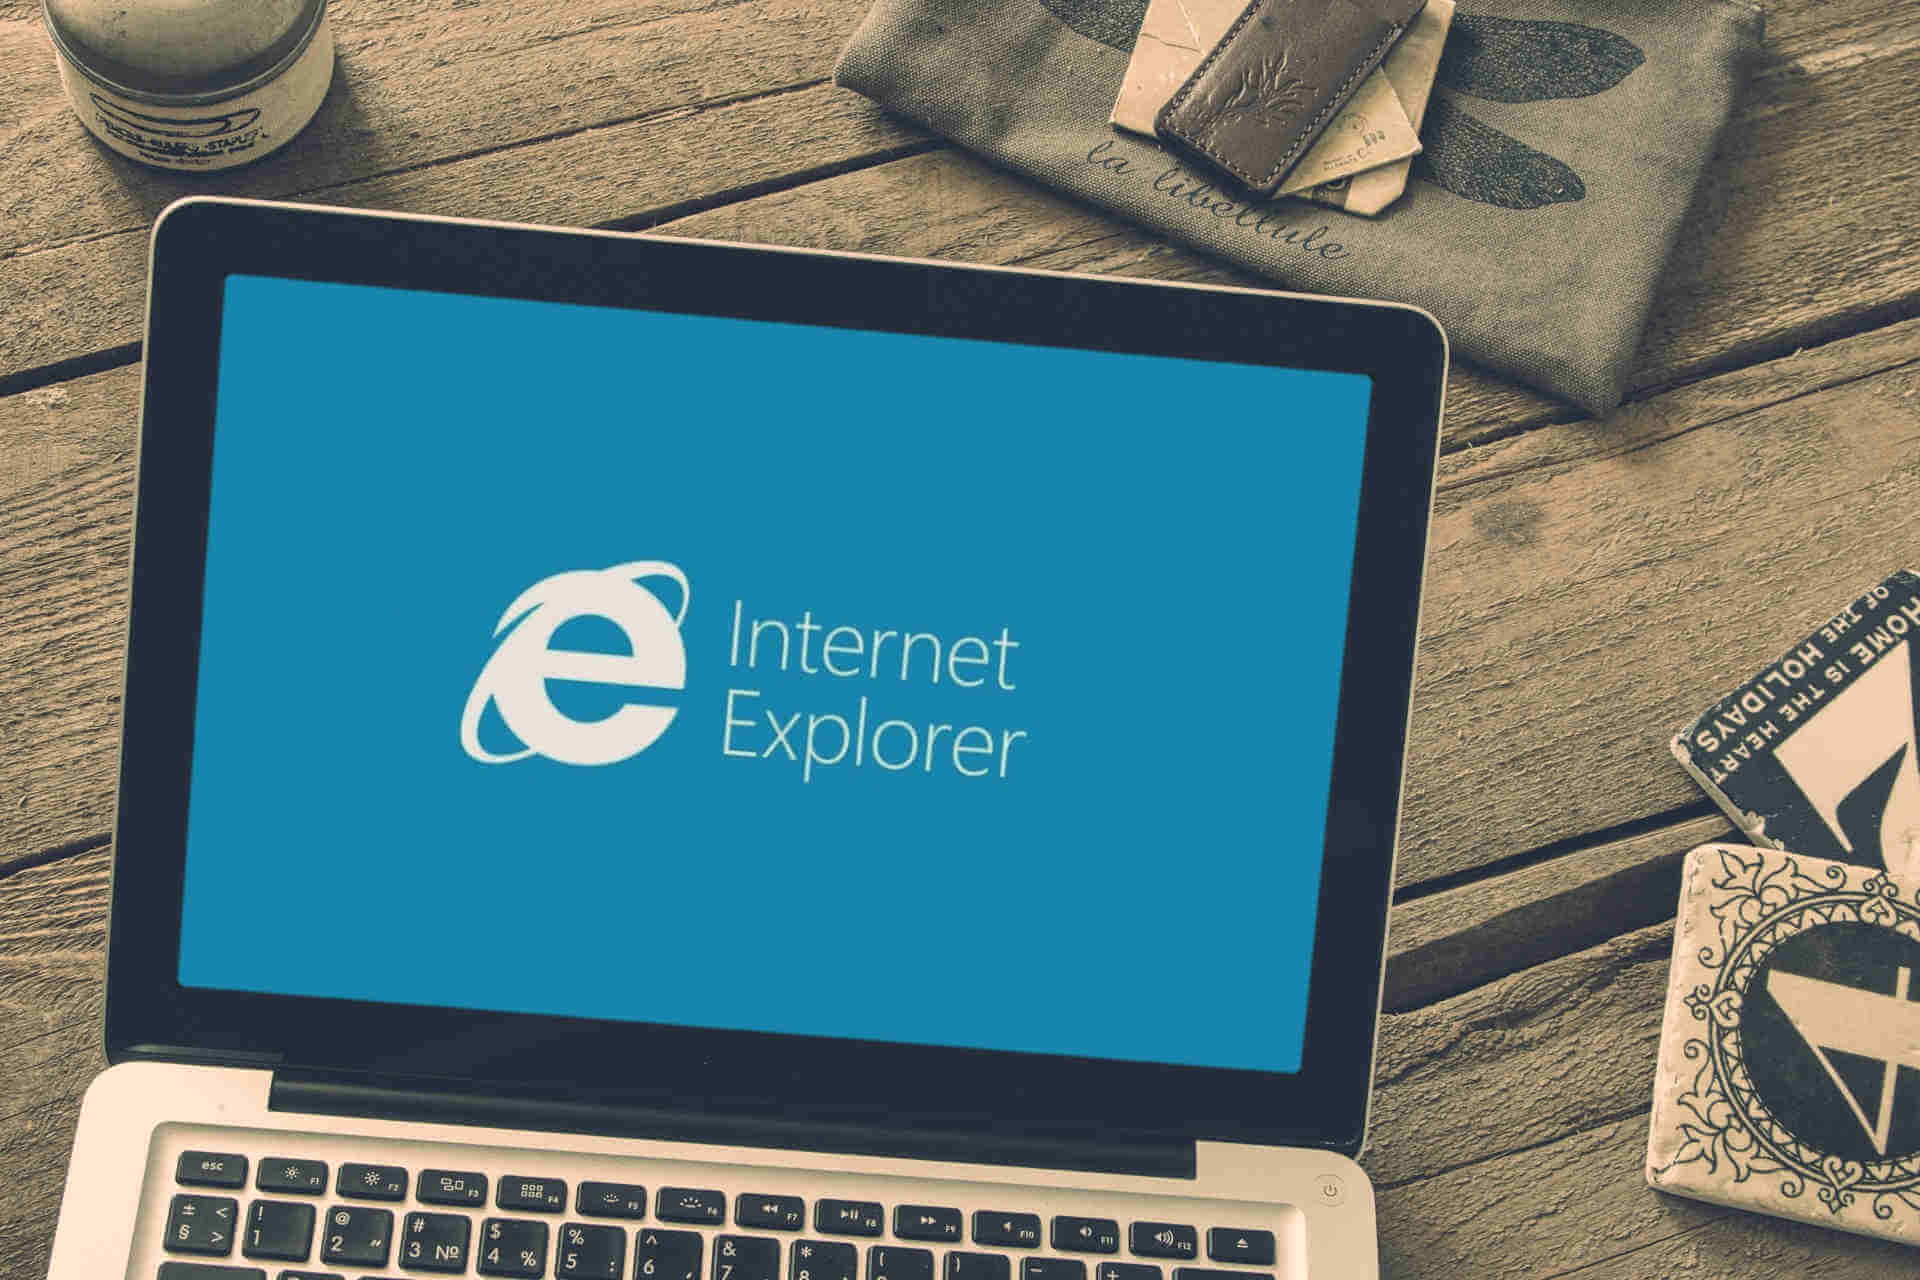 How to FIX Res ieframe.dll errors in Internet Explorer